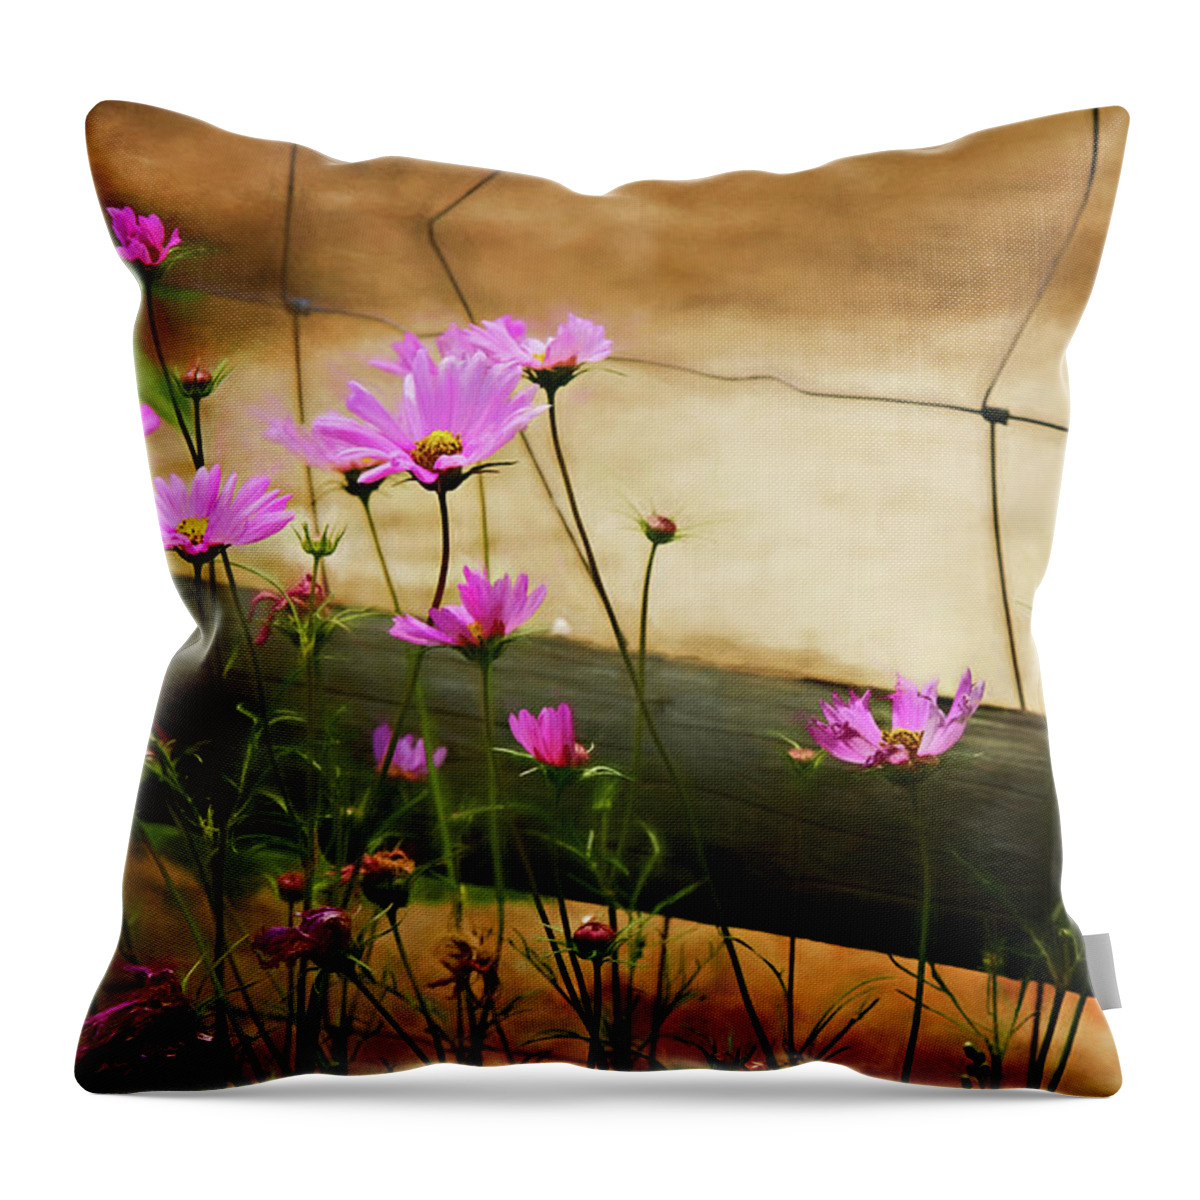  I40 Throw Pillow featuring the photograph Oasis In The Desert by Lana Trussell